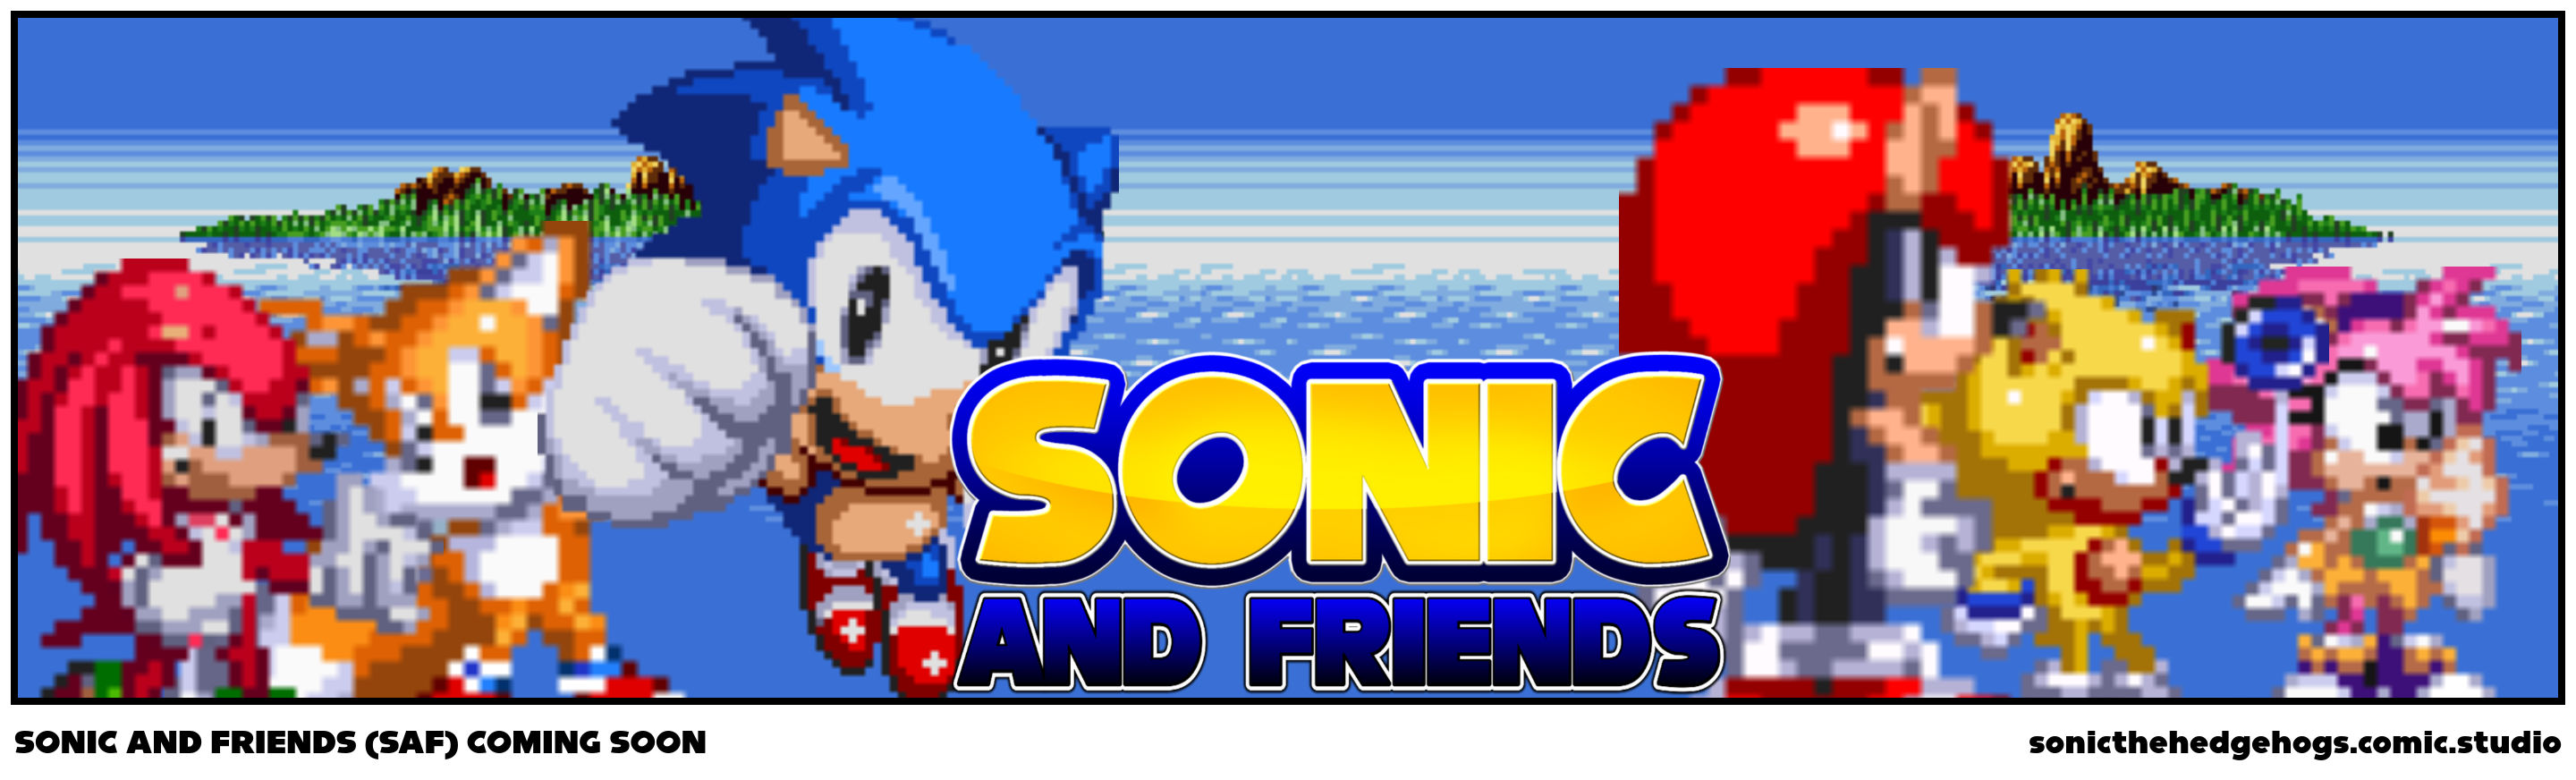 SONIC AND FRIENDS (SAF) COMING SOON